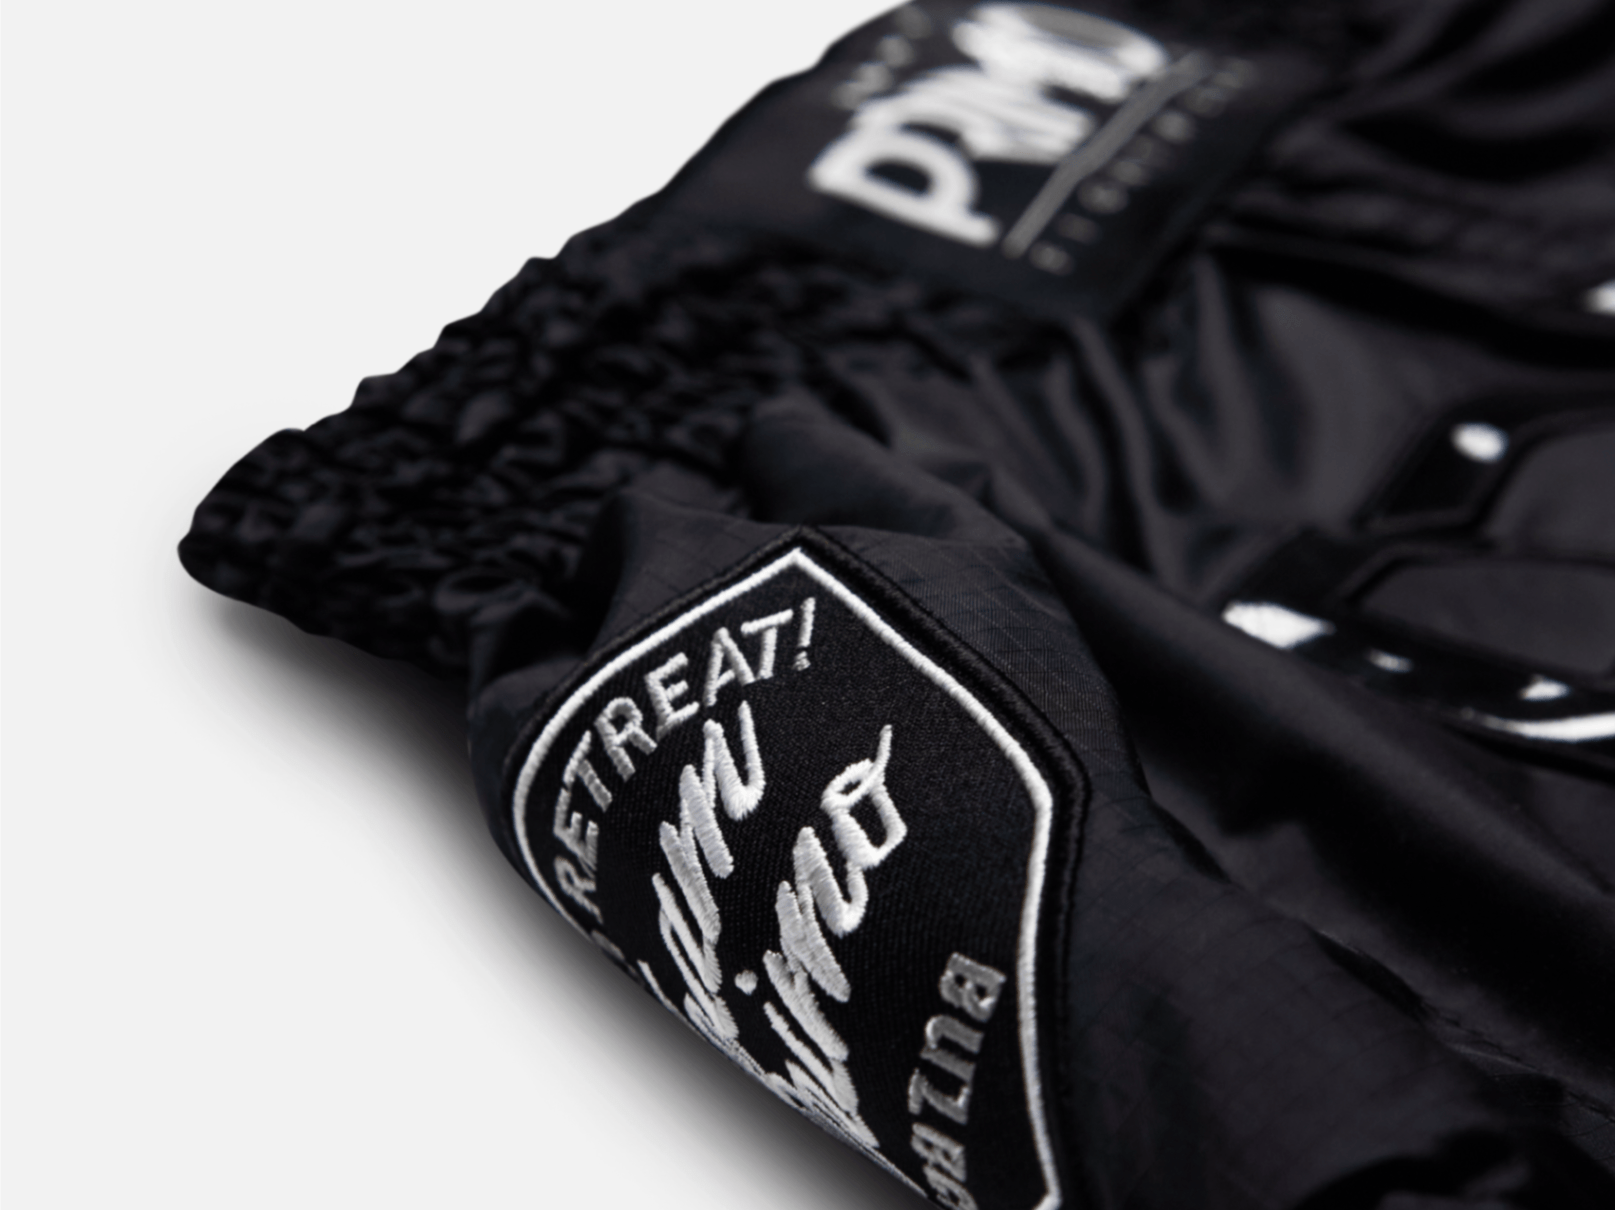 Primo Fight Wear Official Muay Thai Shorts - Super Nylon - Black Panther II